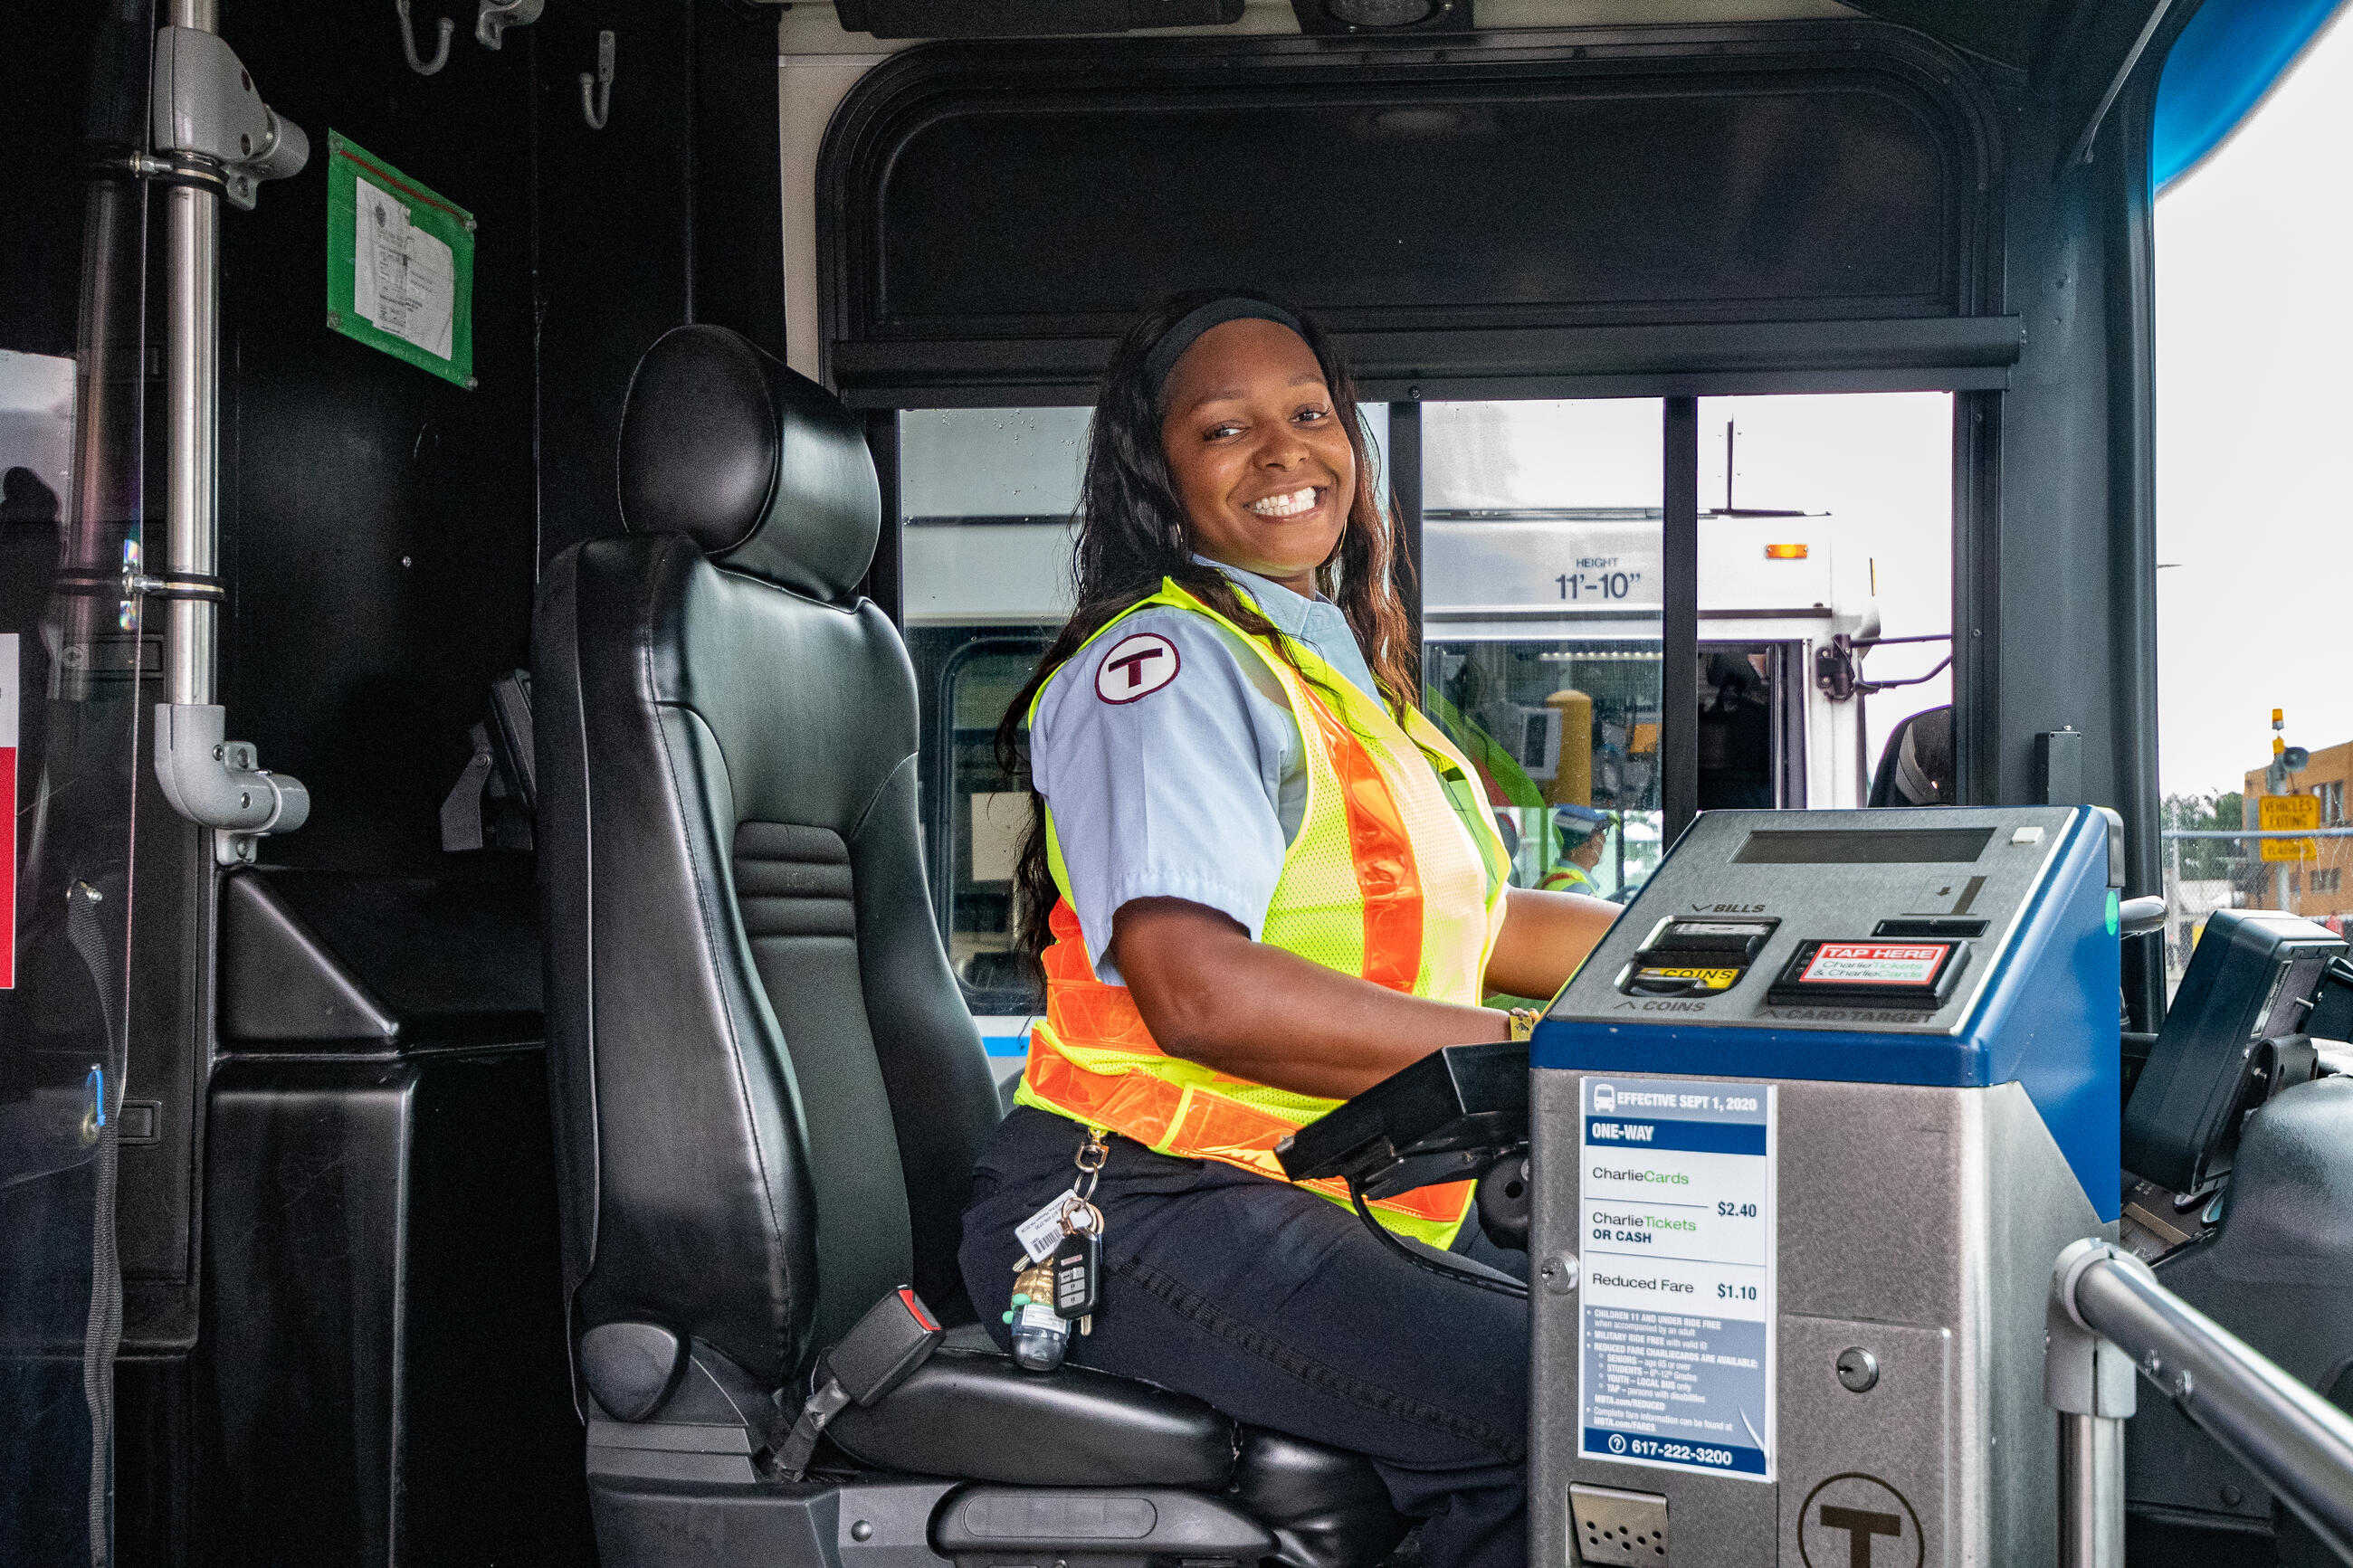 A bus operator is seated at the front of an MBTA bus